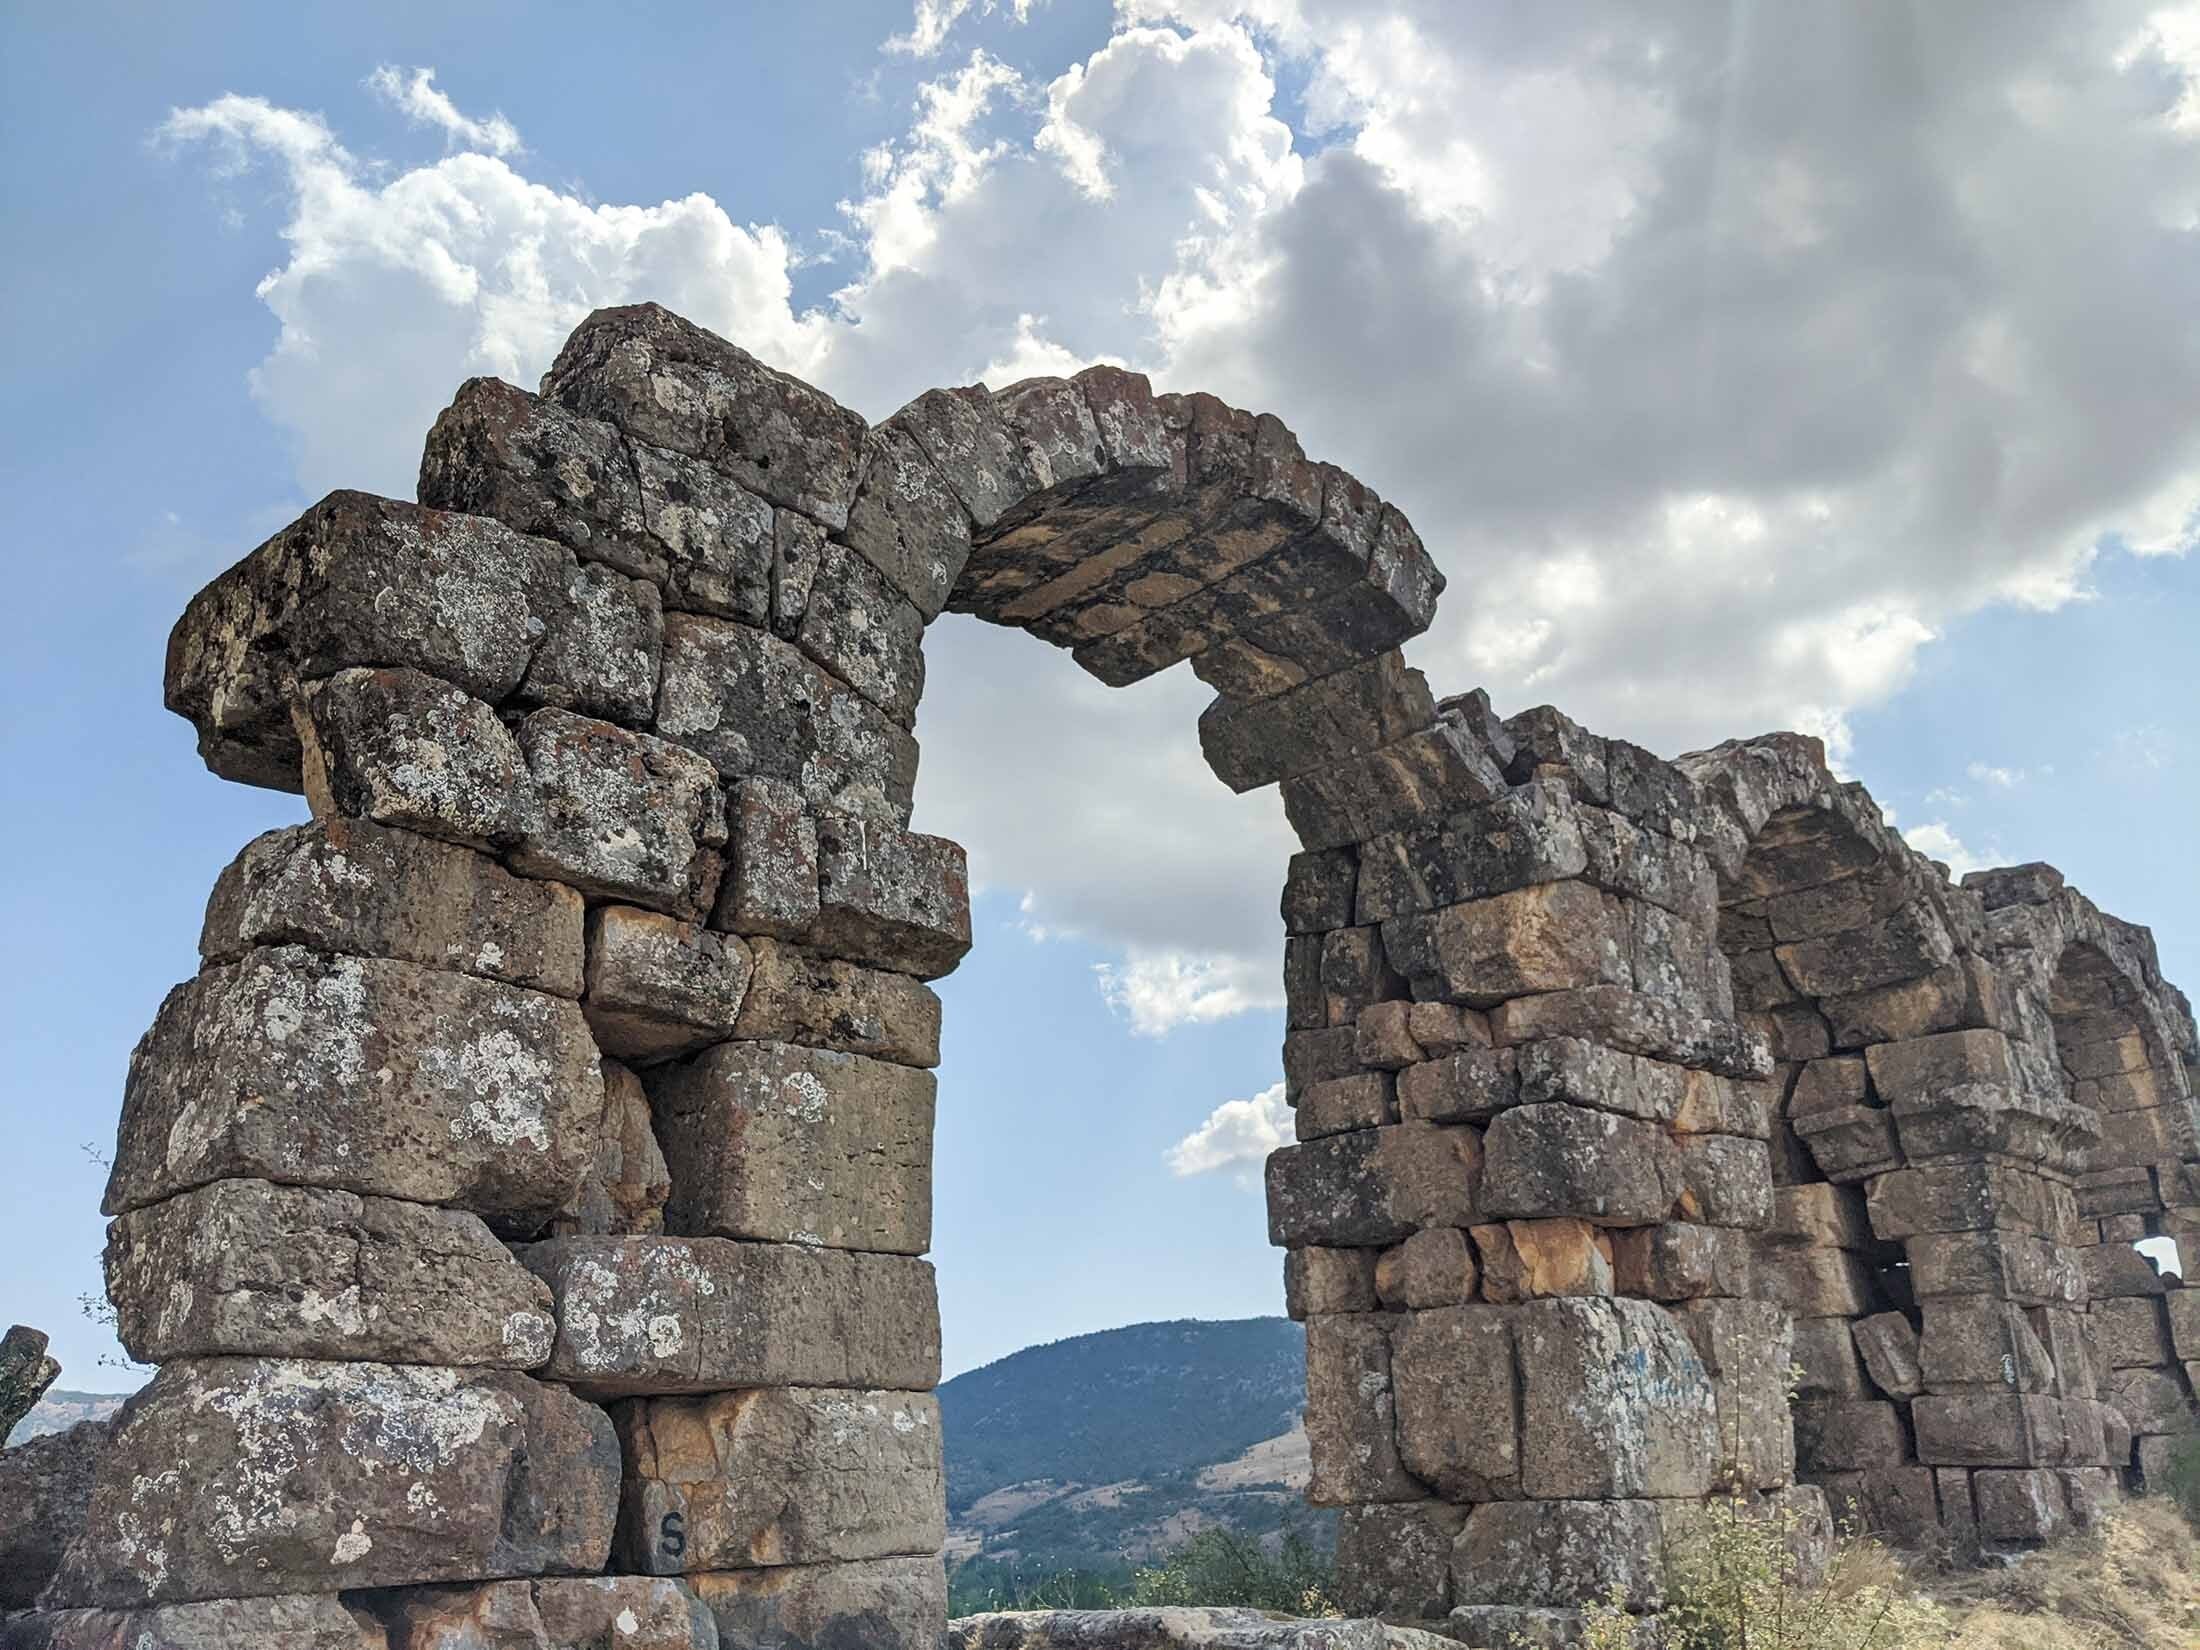 An ancient Roman aqueduct leading to the city of Antioch built by Emperor Trajan in the 2nd century A.D., stands outside modern-day Hatay, Turkey. (Shutterstock Photo)